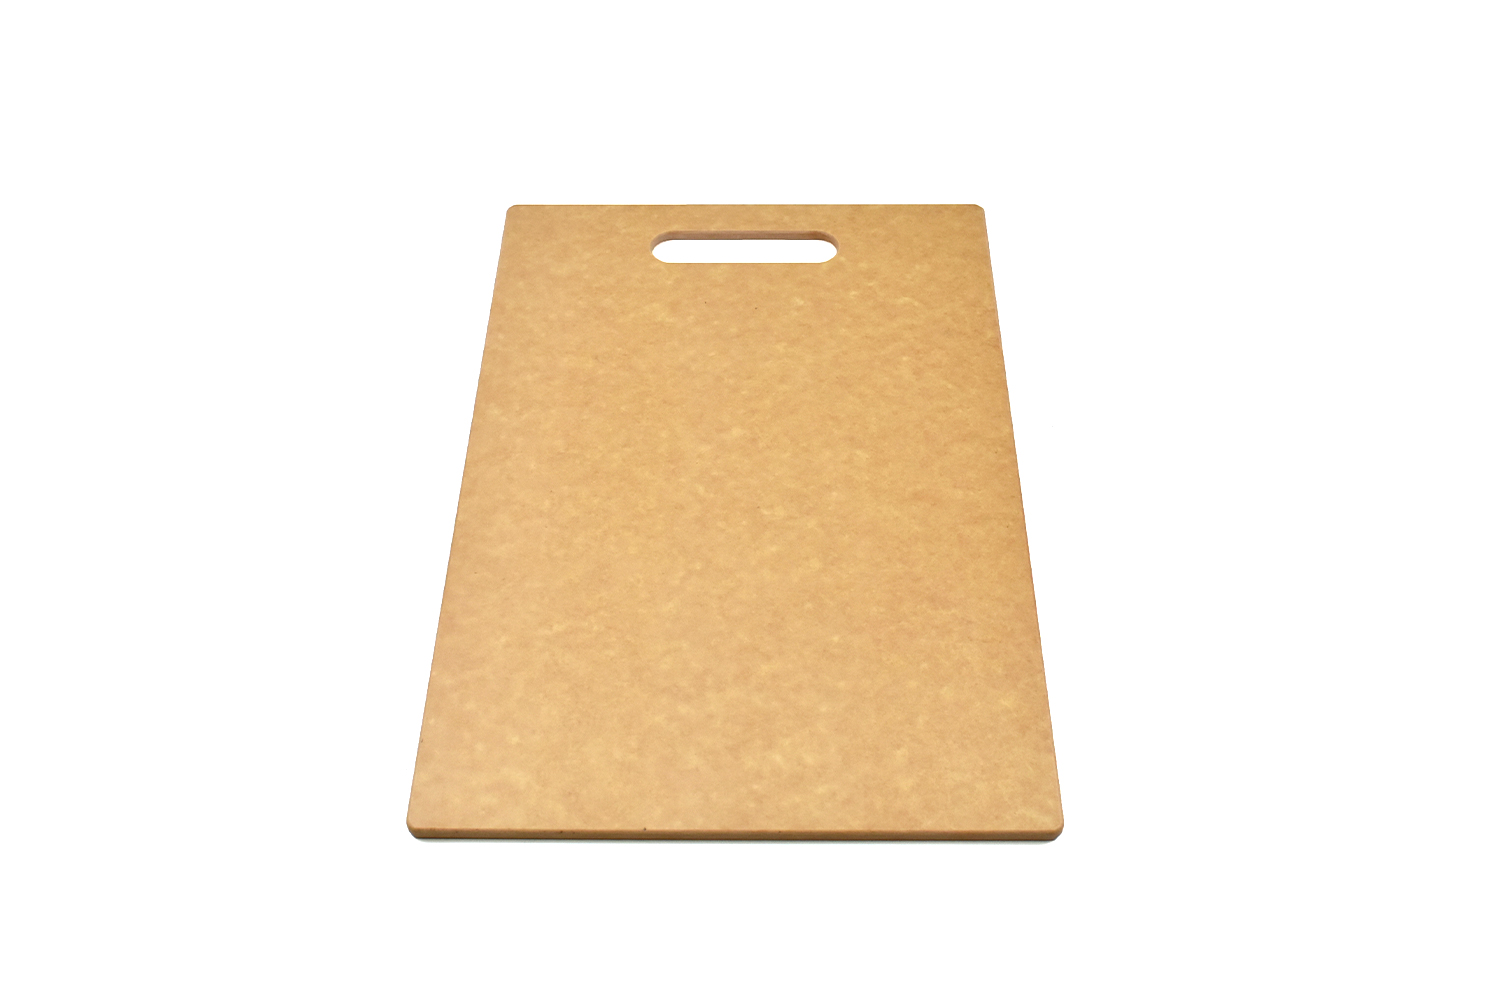 Richlite cutting board, paper-composite that is durable & water-resistant